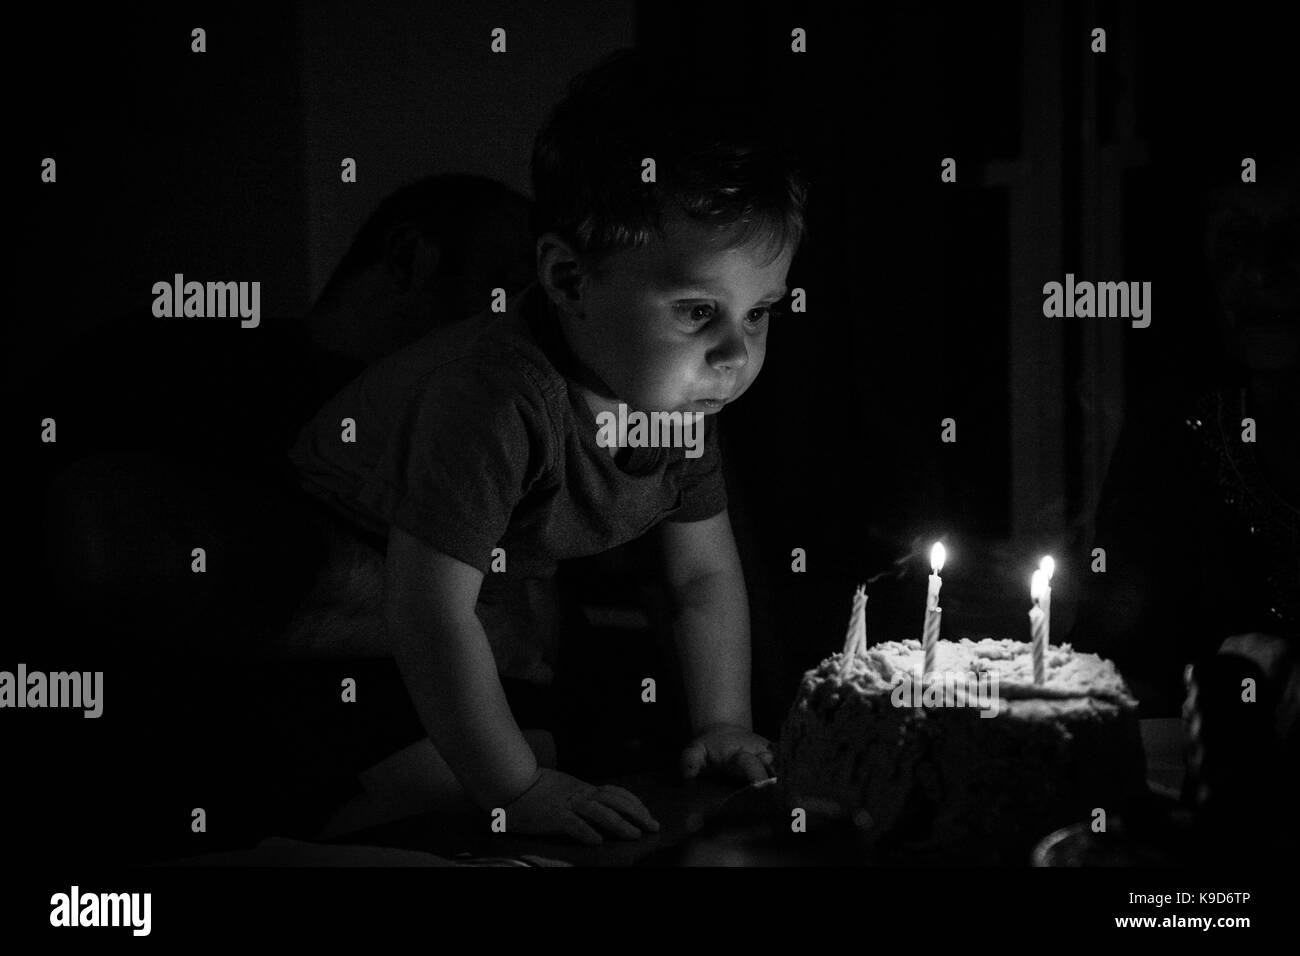 Toddler Boy blowing out candles on his birthday cake Stock Photo